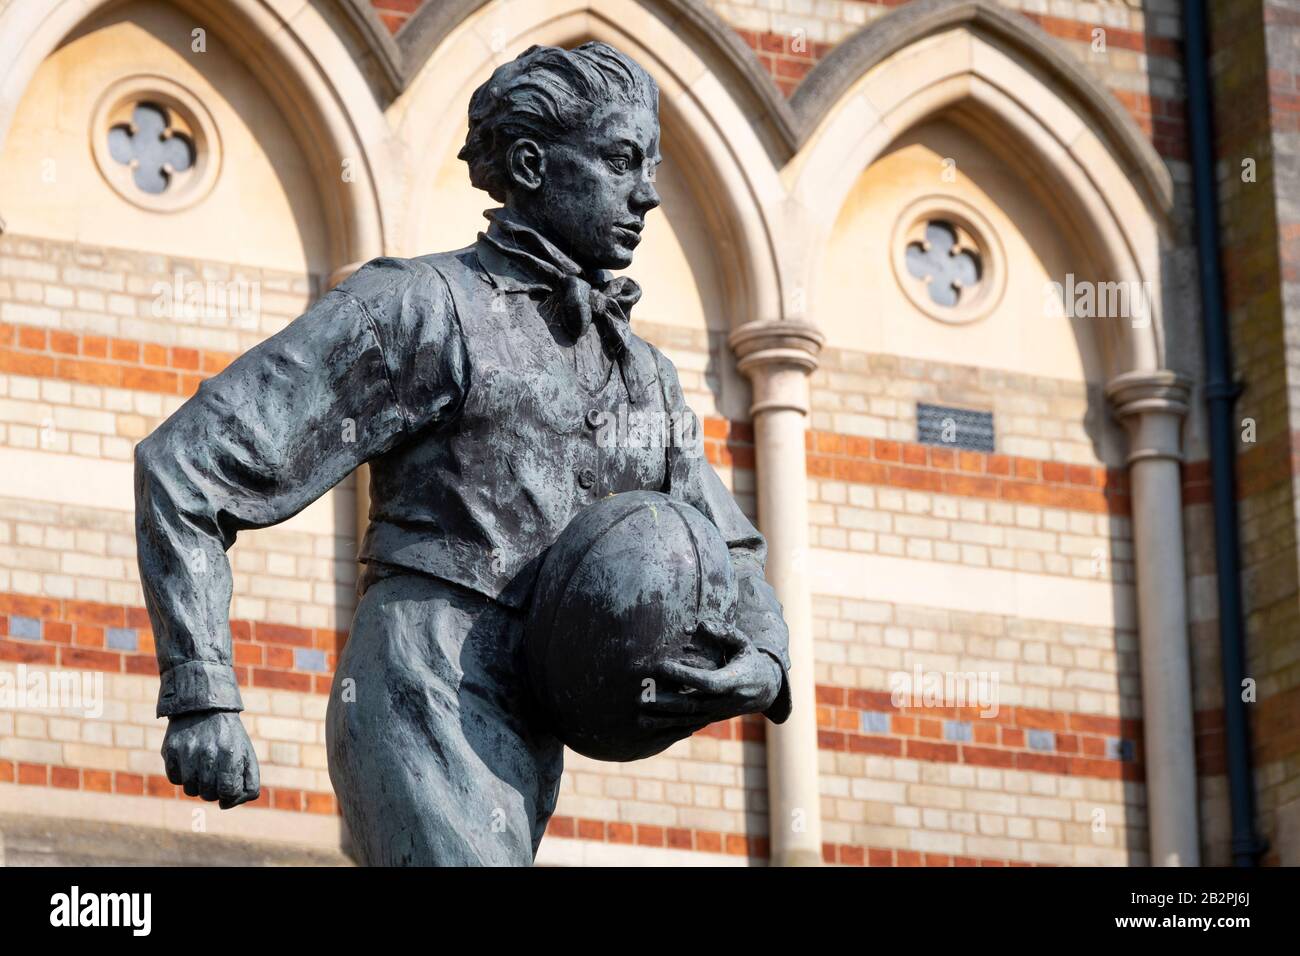 Statue of William Webb-Ellis, the originator of Rugby football, outside Rugby School, Rugby, Warwickshire, England. Stock Photo